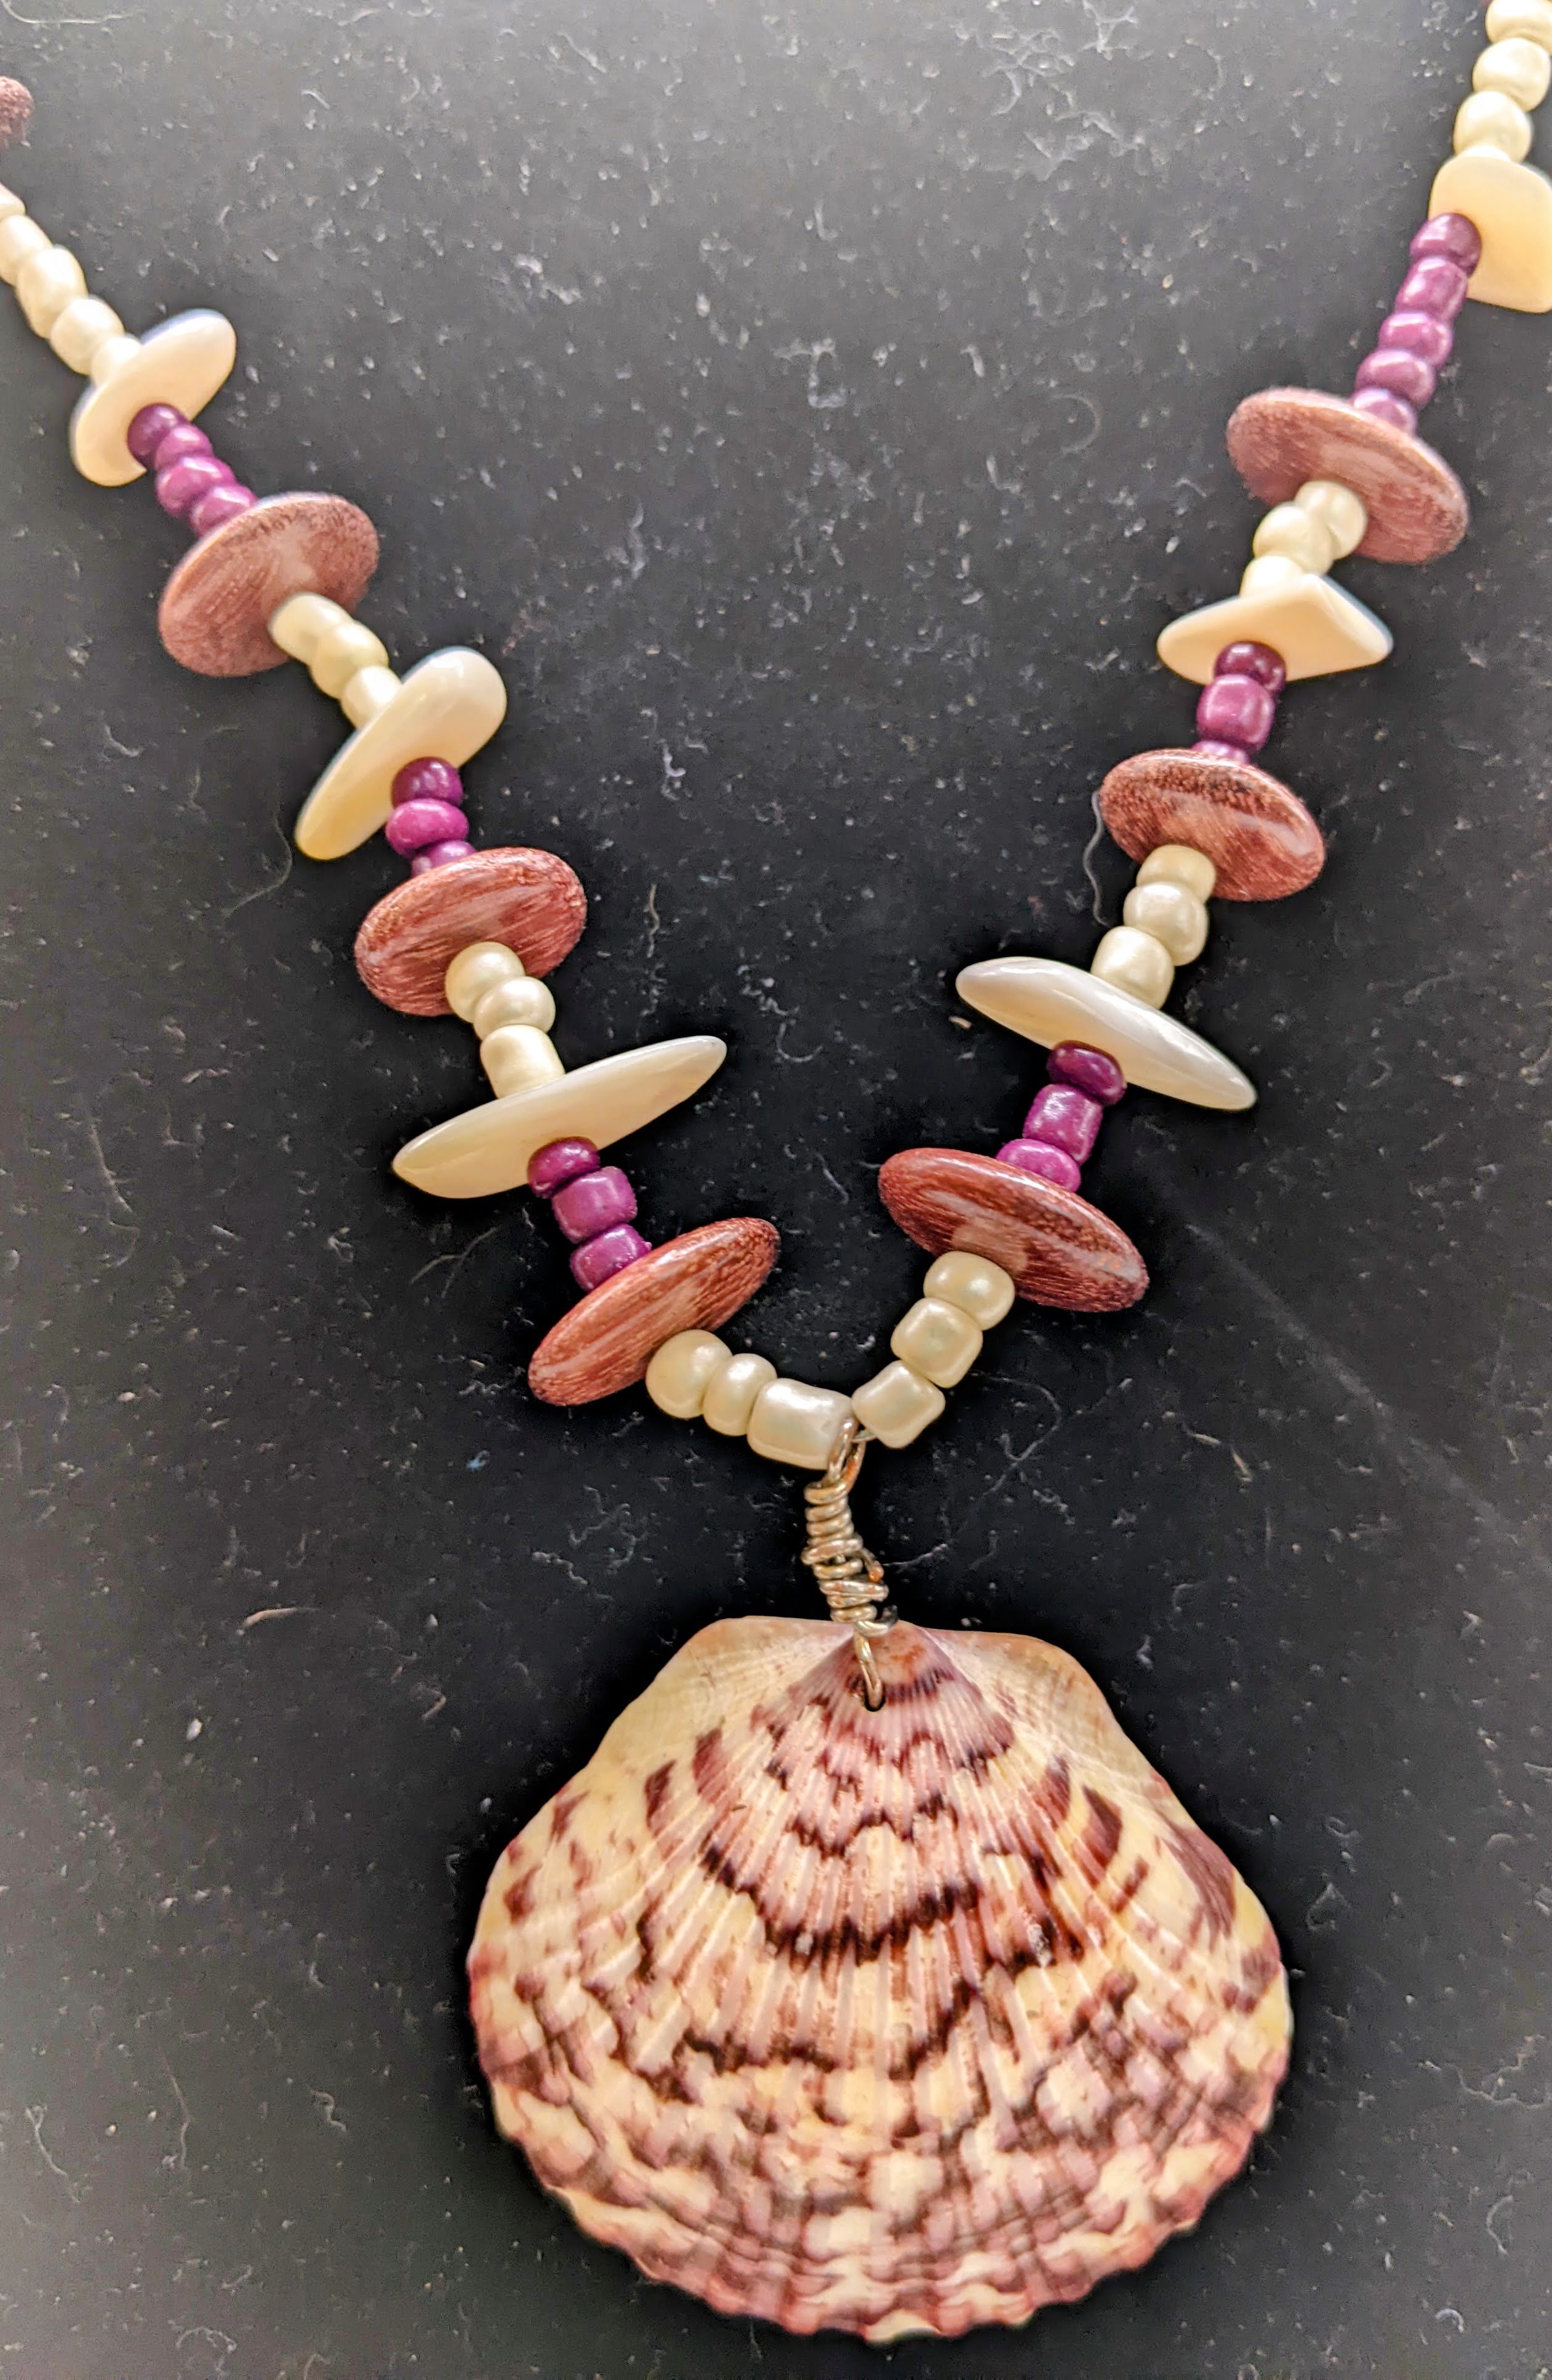 Calico scallop shell and wood beads necklace